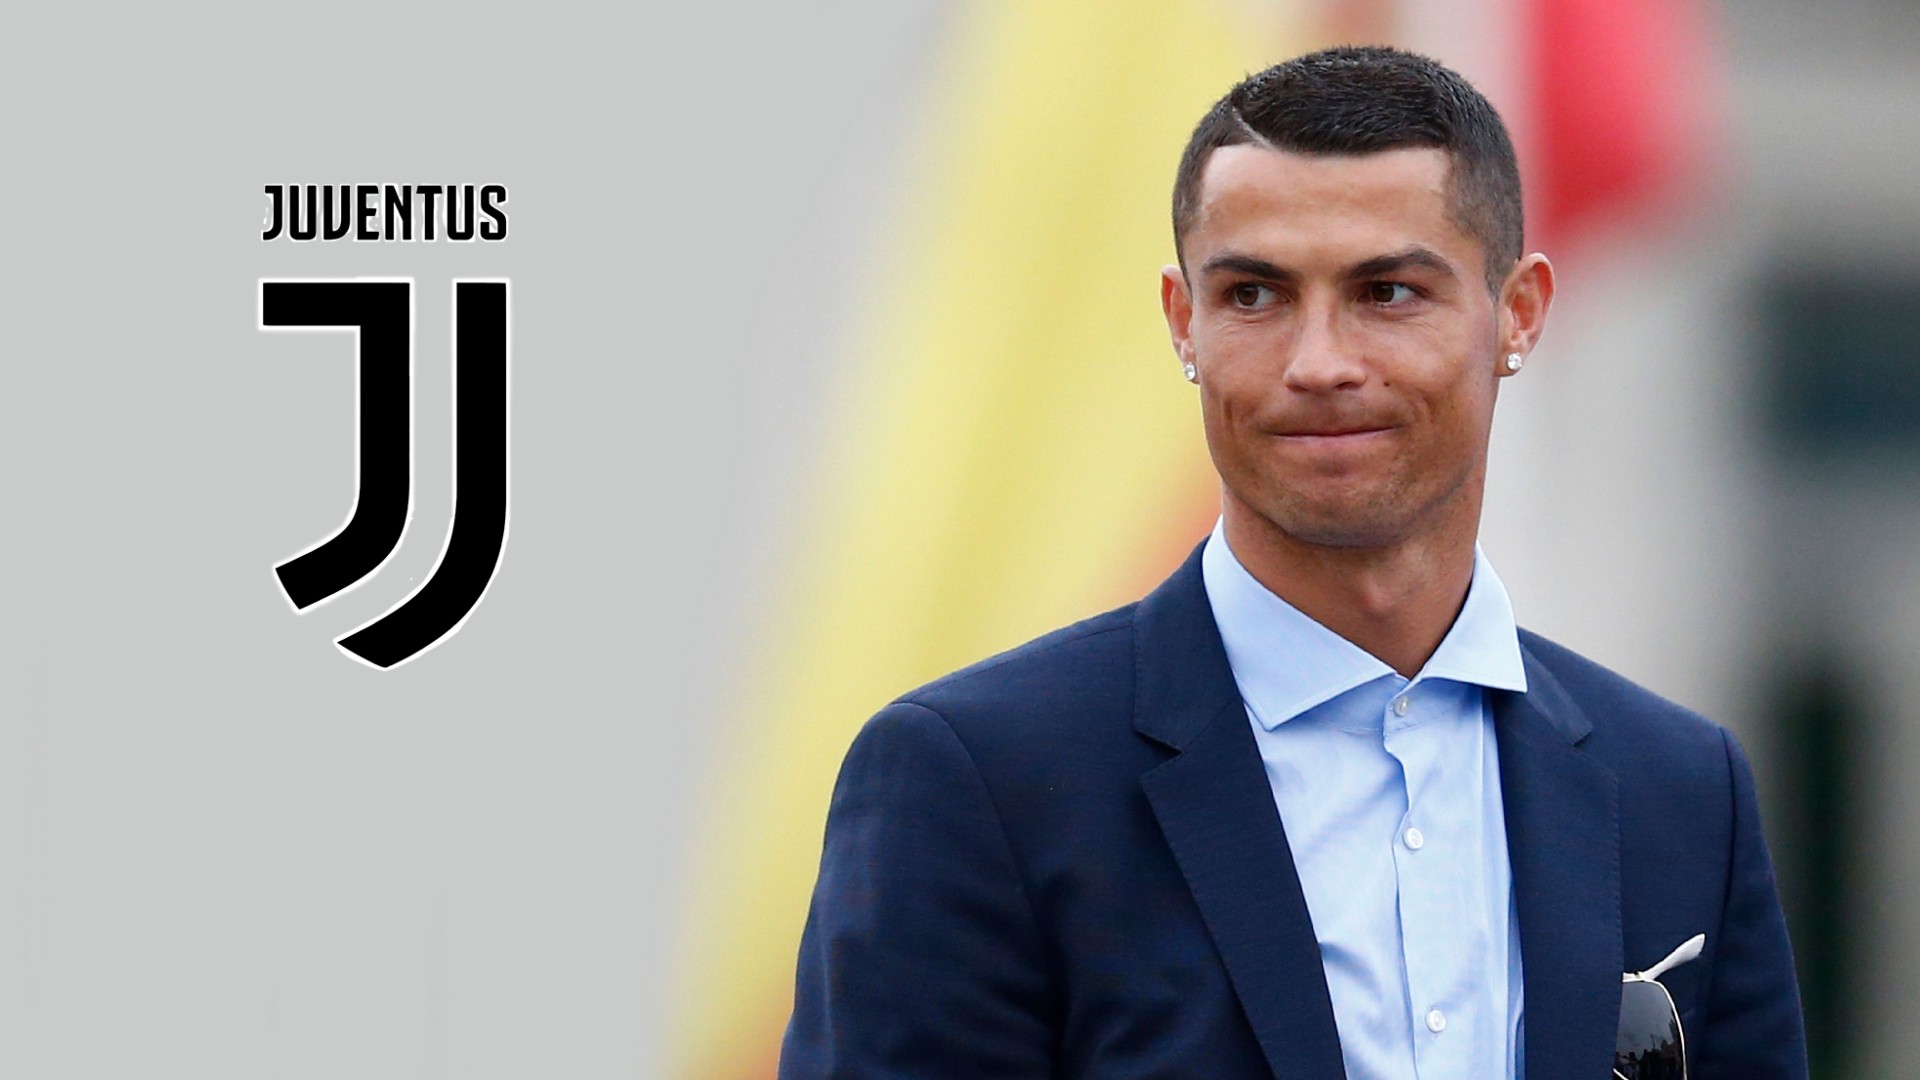 Ronaldo 7 Juventus Wallpaper HD With Resolution 1920X1080 pixel. You can make this wallpaper for your Mac or Windows Desktop Background, iPhone, Android or Tablet and another Smartphone device for free